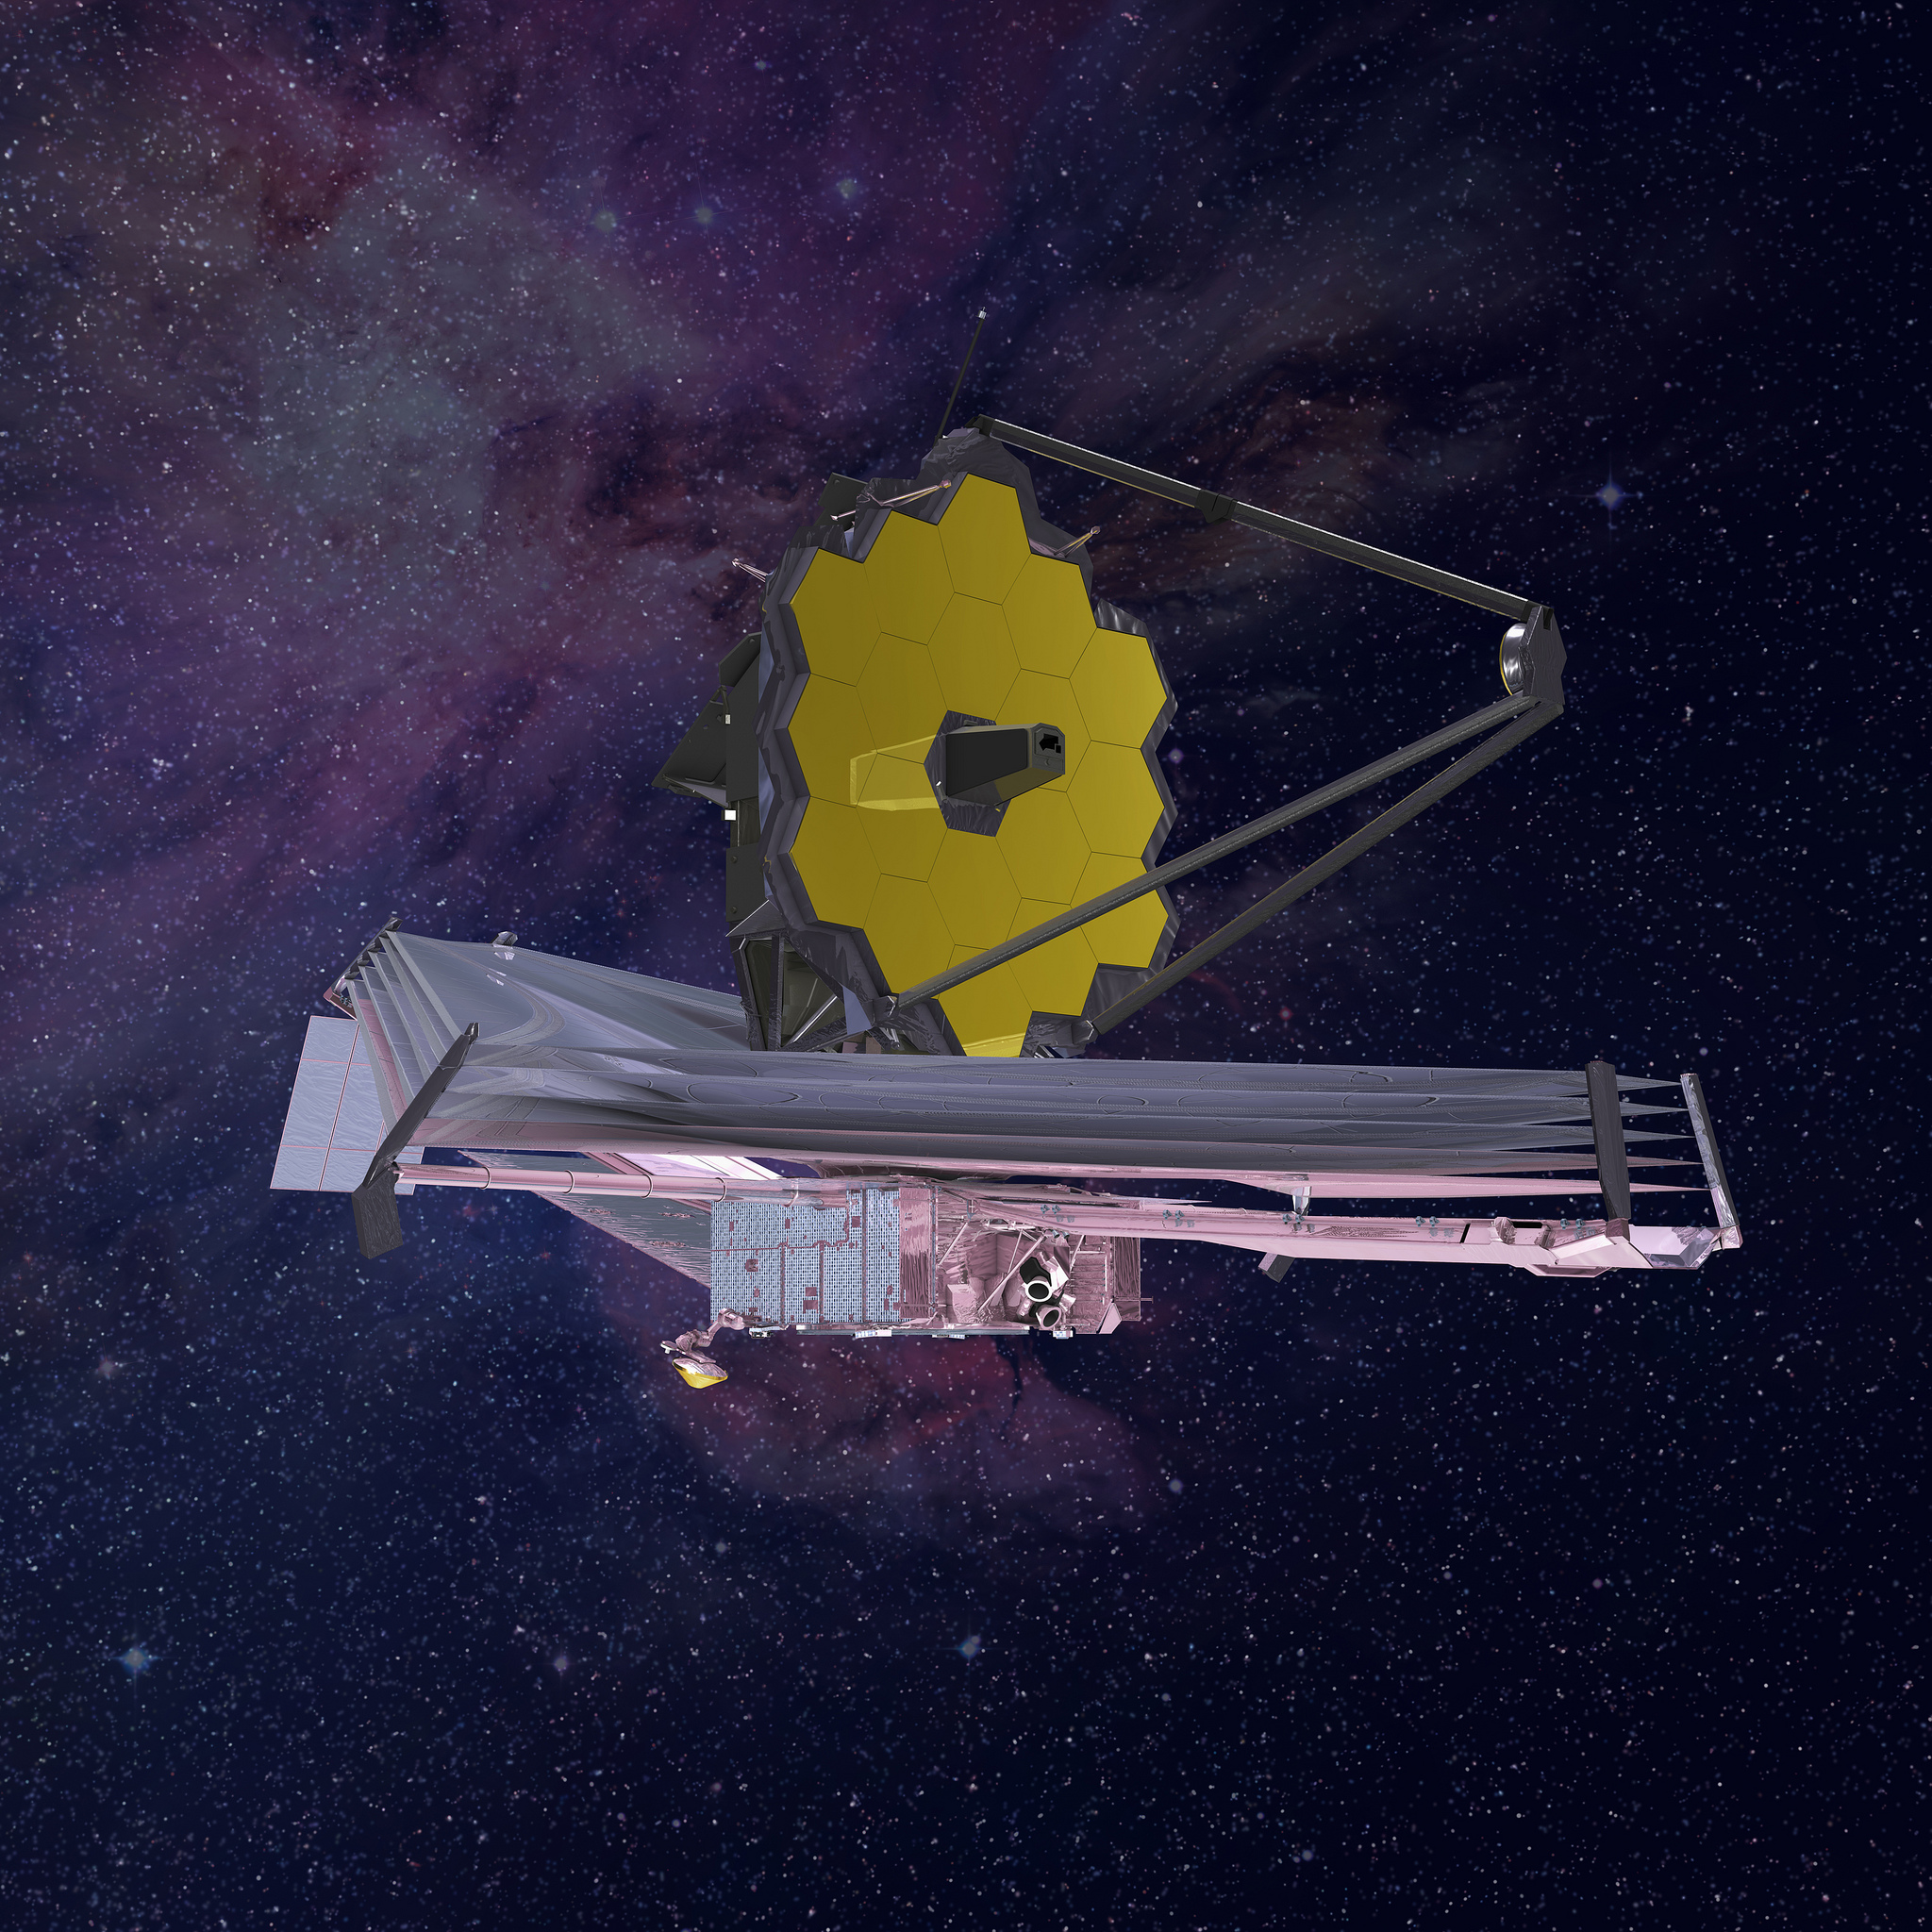 Webb Telescope to See First Galaxies and Faraway Worlds: NASA's